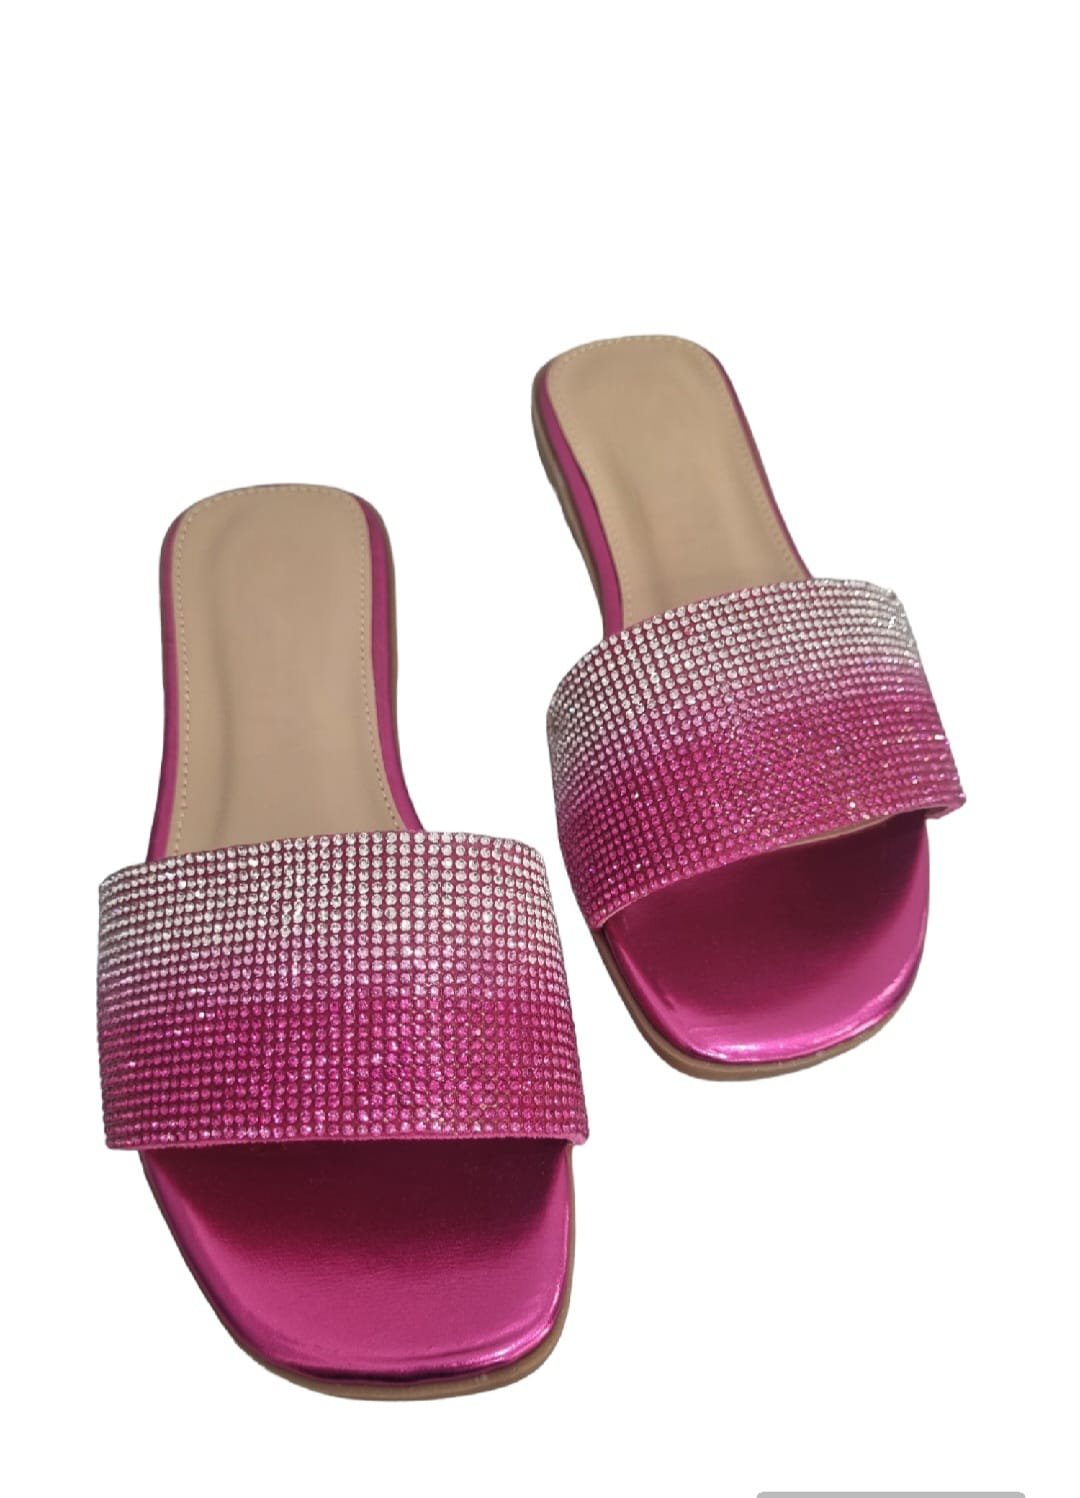 Fuchsia slippers with light points, 1.5cm rise, comfort cushion.